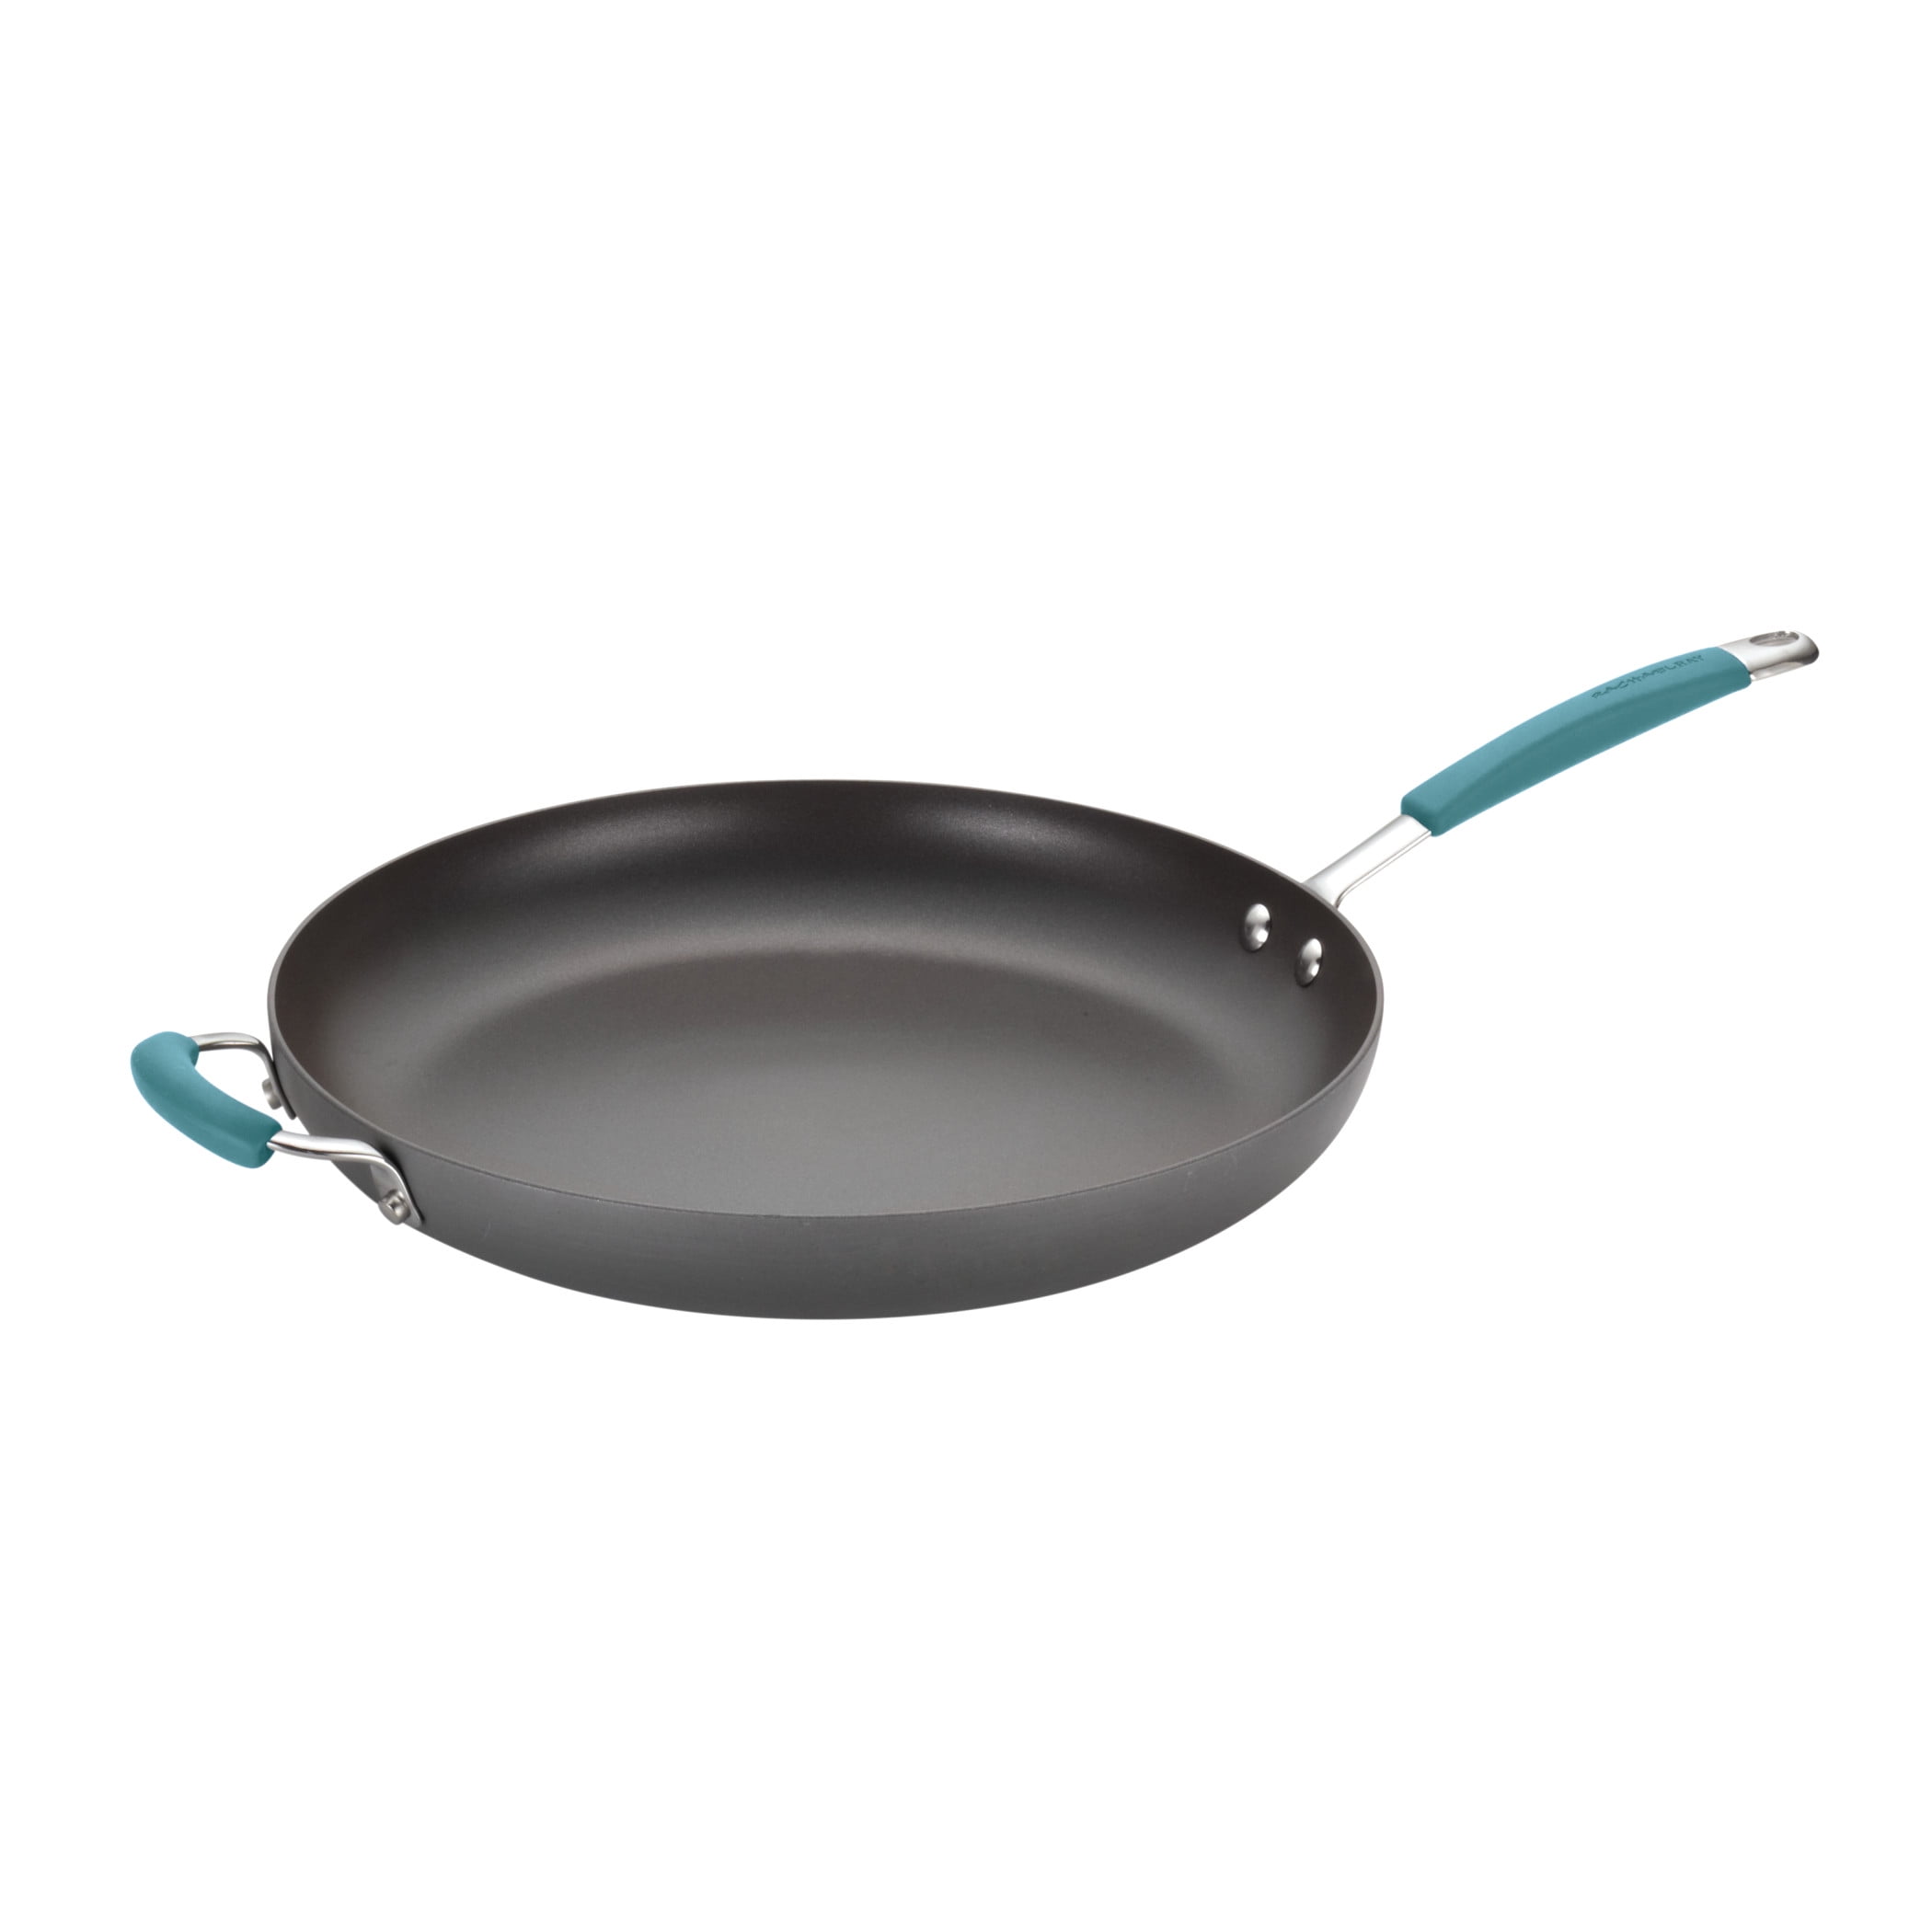 Rachael Ray 14-Inch Cucina Hard-Anodized Nonstick Skillet with Helper  Handle, Gray/Agave Blue